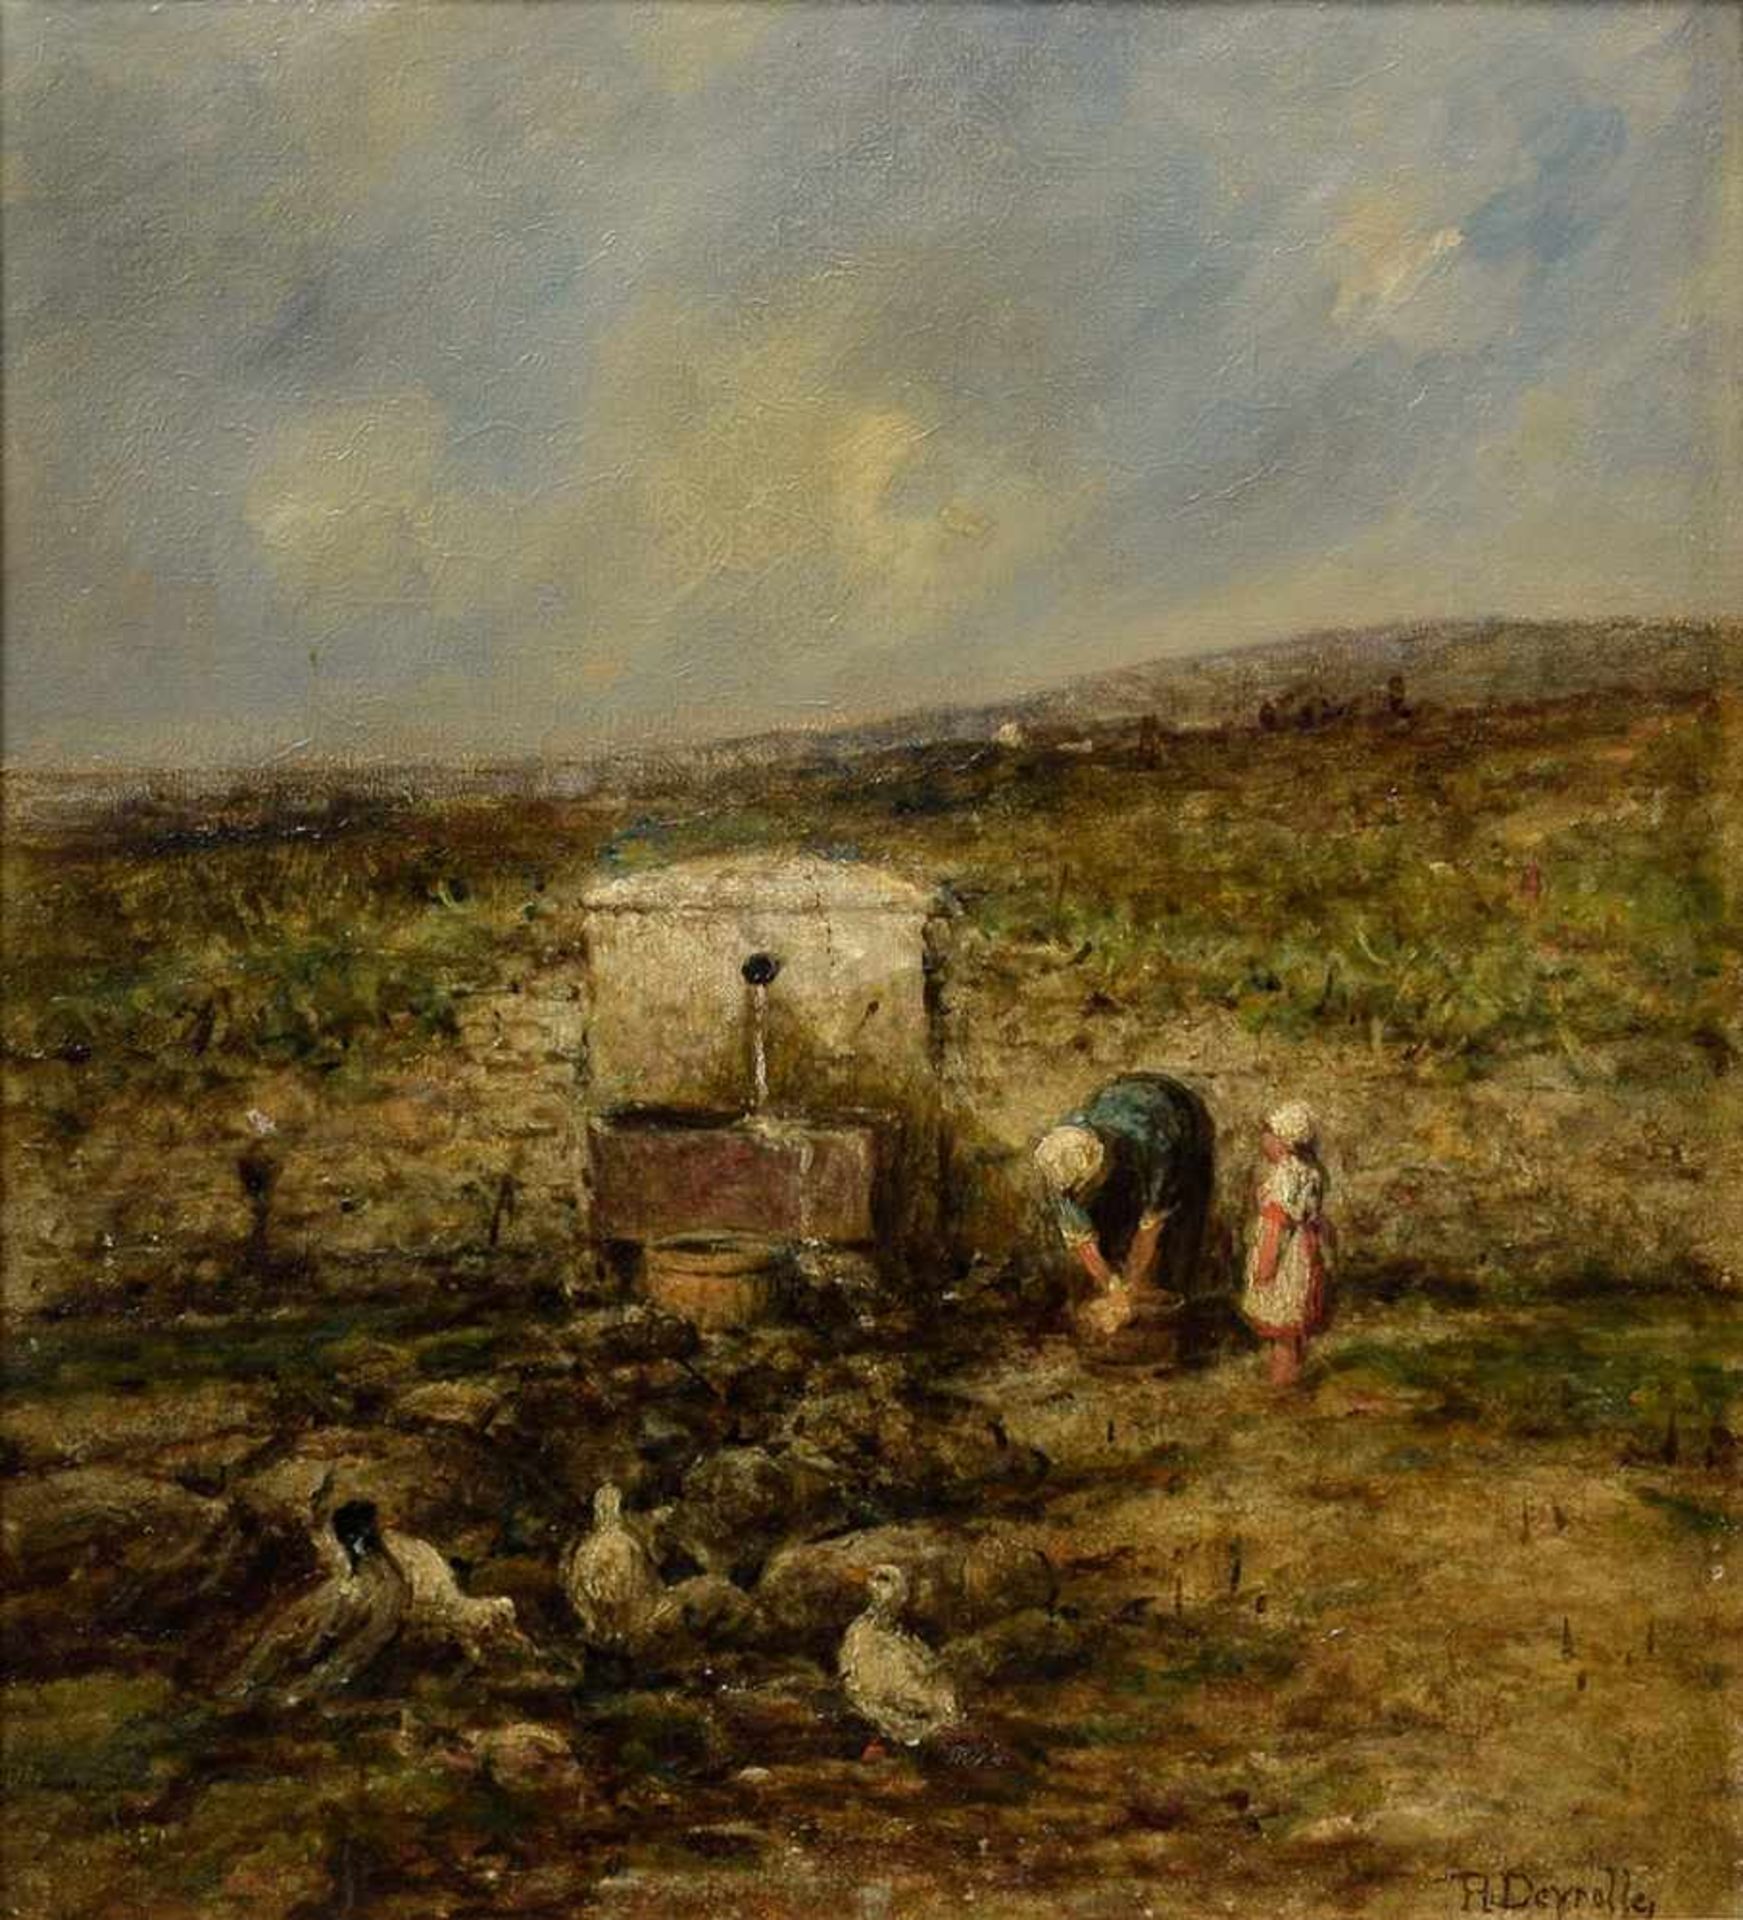 Deyrolle, Theophile Louis (1844-1923) "At the spring of the field", oil/canvas, signed lower